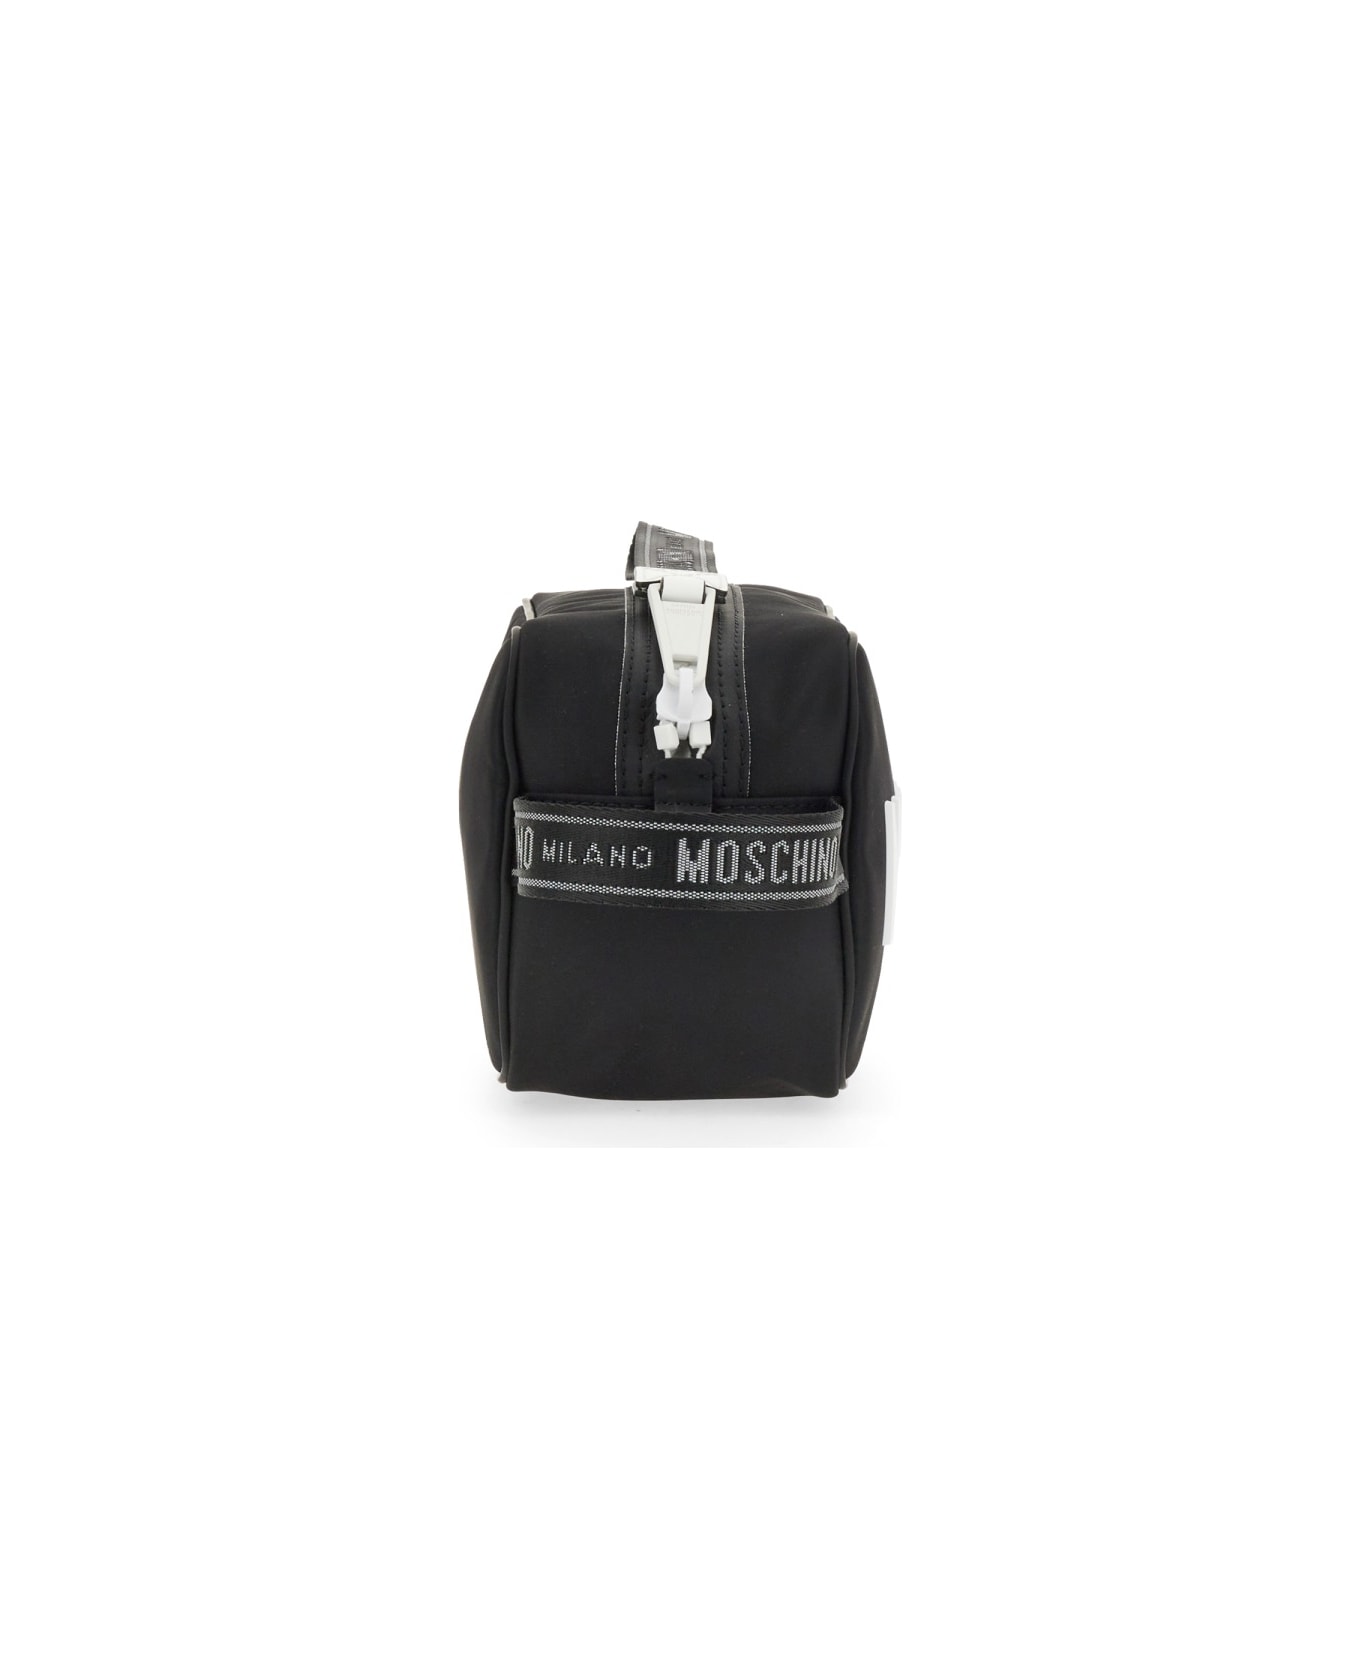 Moschino Beauty Case With Logo - BLACK